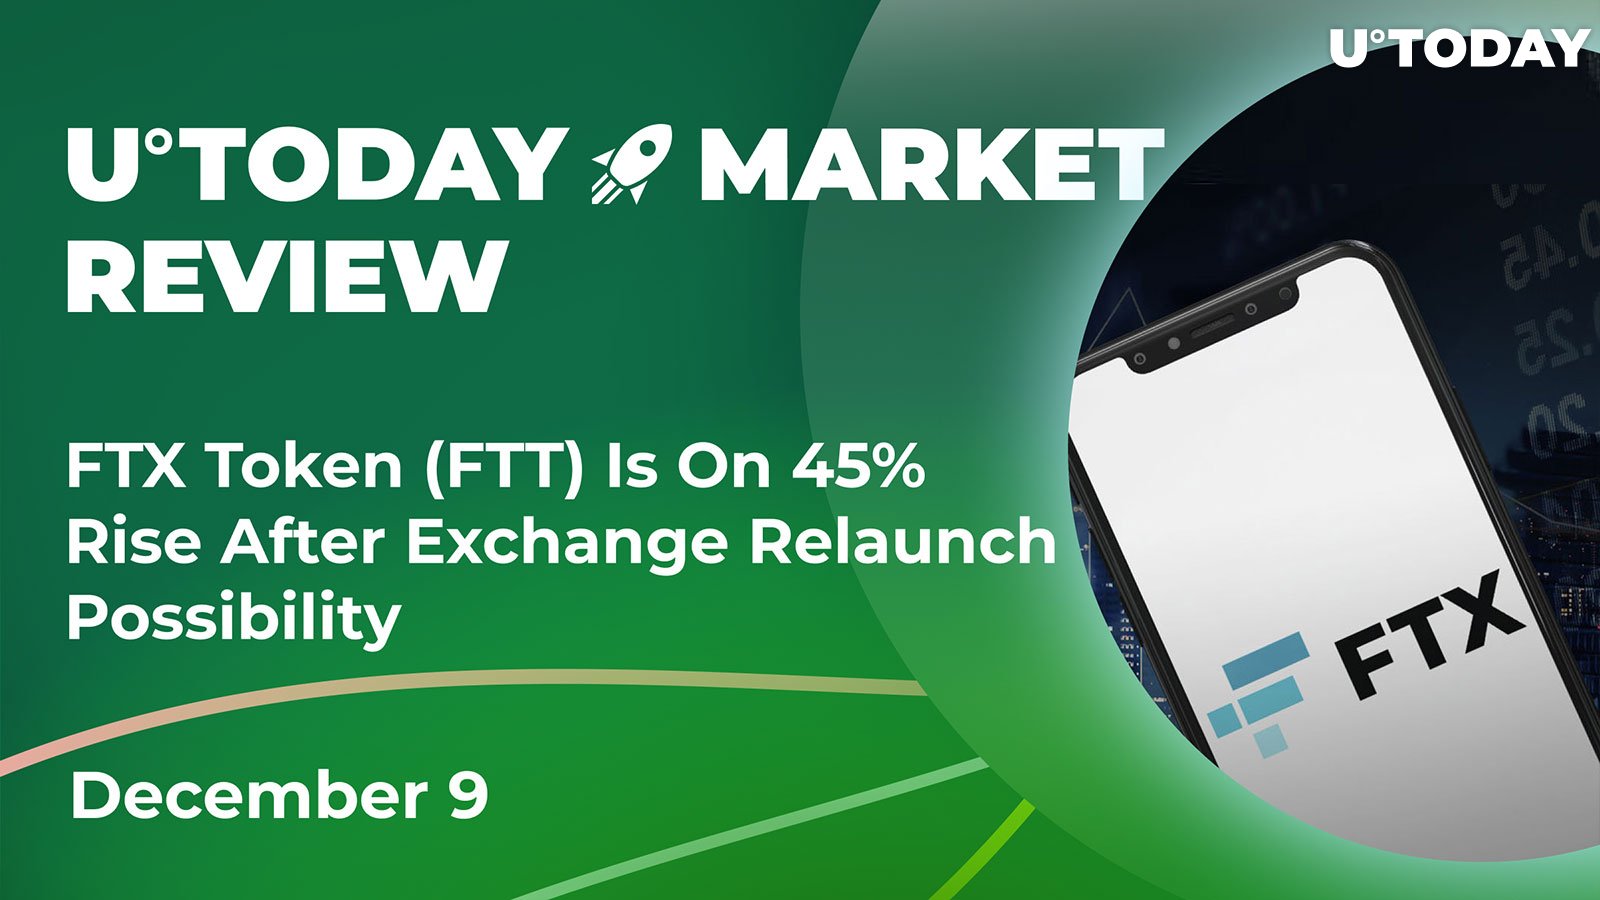 FTX Token (FTT) on 45% Rise After Exchange Relaunch Possibility: Crypto Market Review, Dec. 9